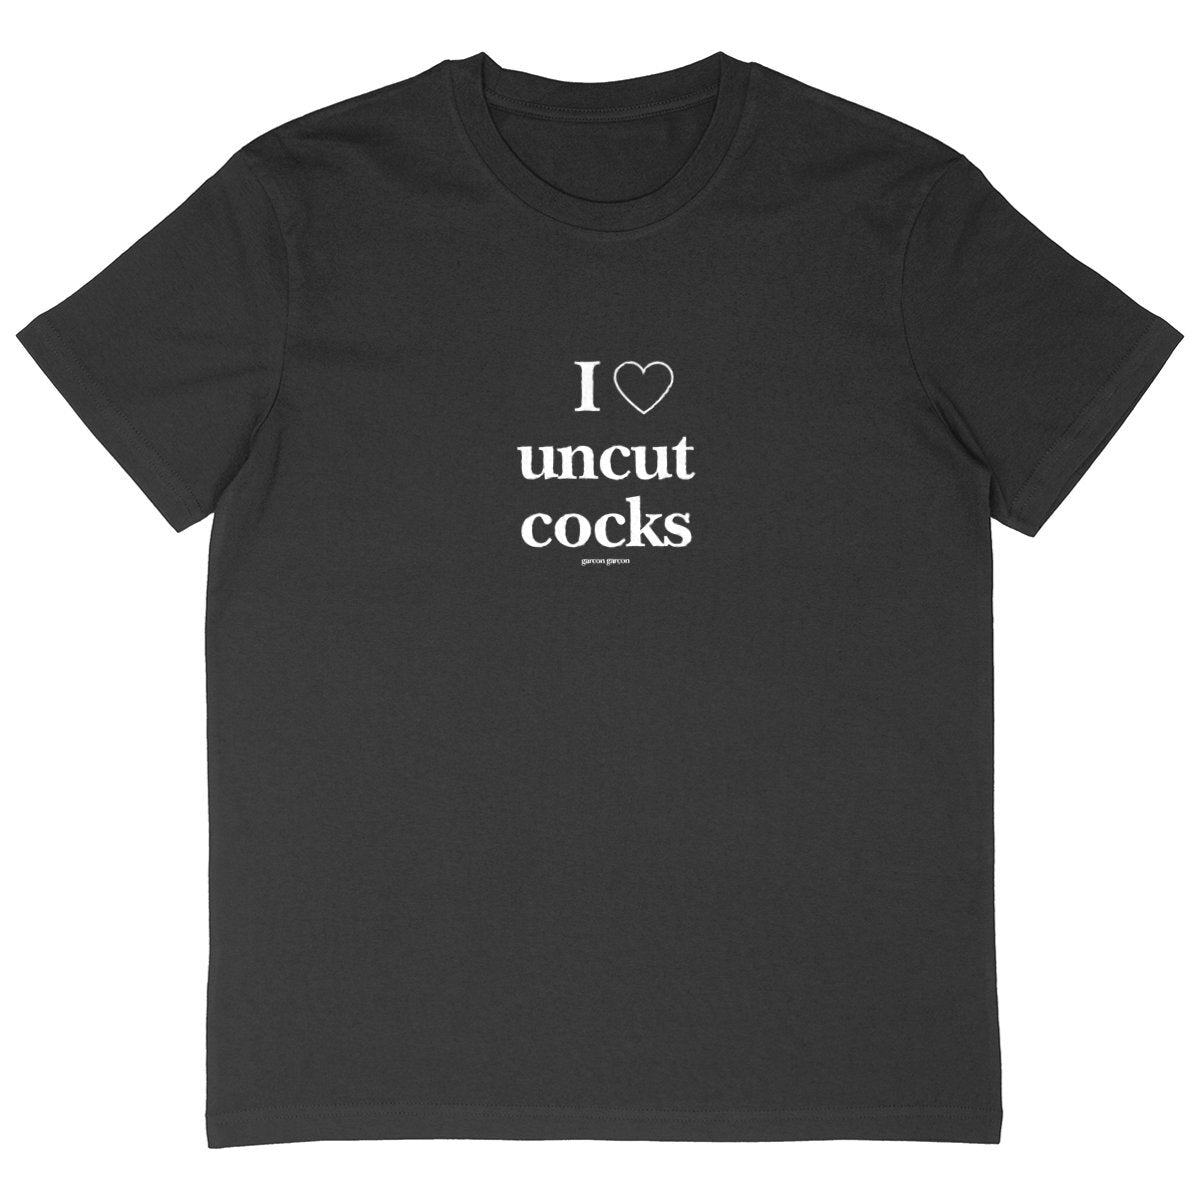 i love uncut cocks tee oversized. garçon garçon tee oversize BLACK. Dive into the essence of Parisian cool with this oversized tee. The subtle 'garçon garçon' signature whispers a chic narrative, offering a slice of the city's famed elegance. Perfect for those who speak style with simplicity.